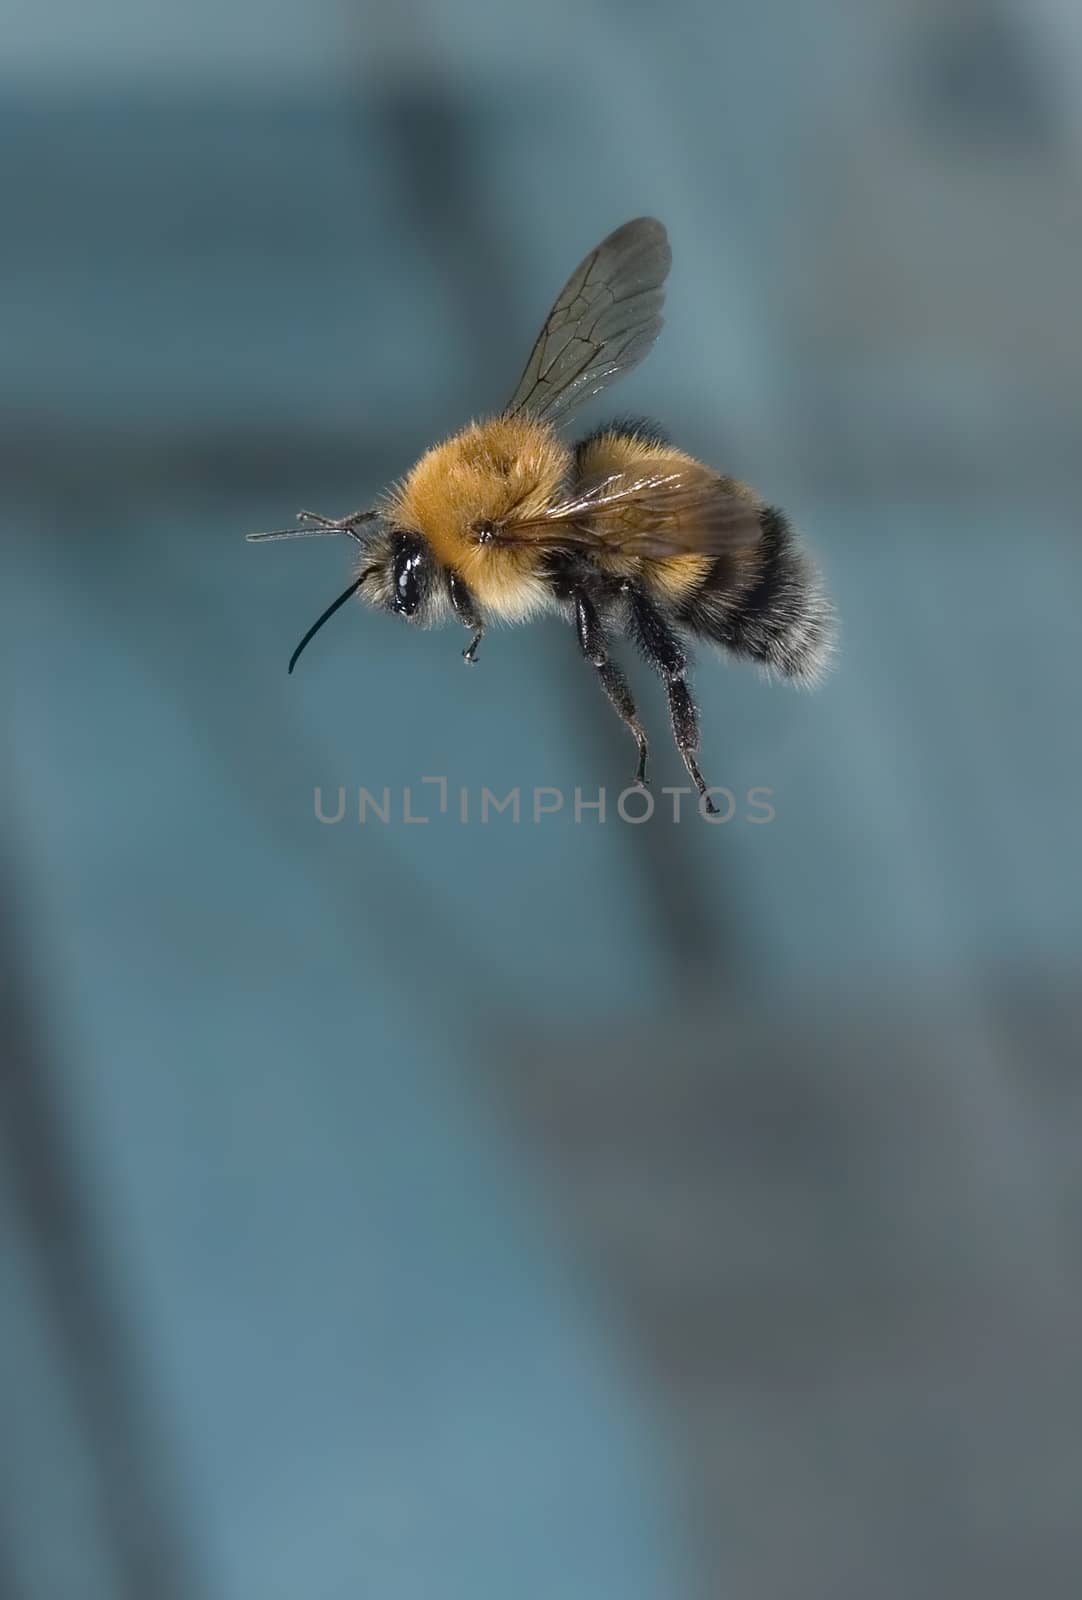 Photo of a bumblebee on a blue background